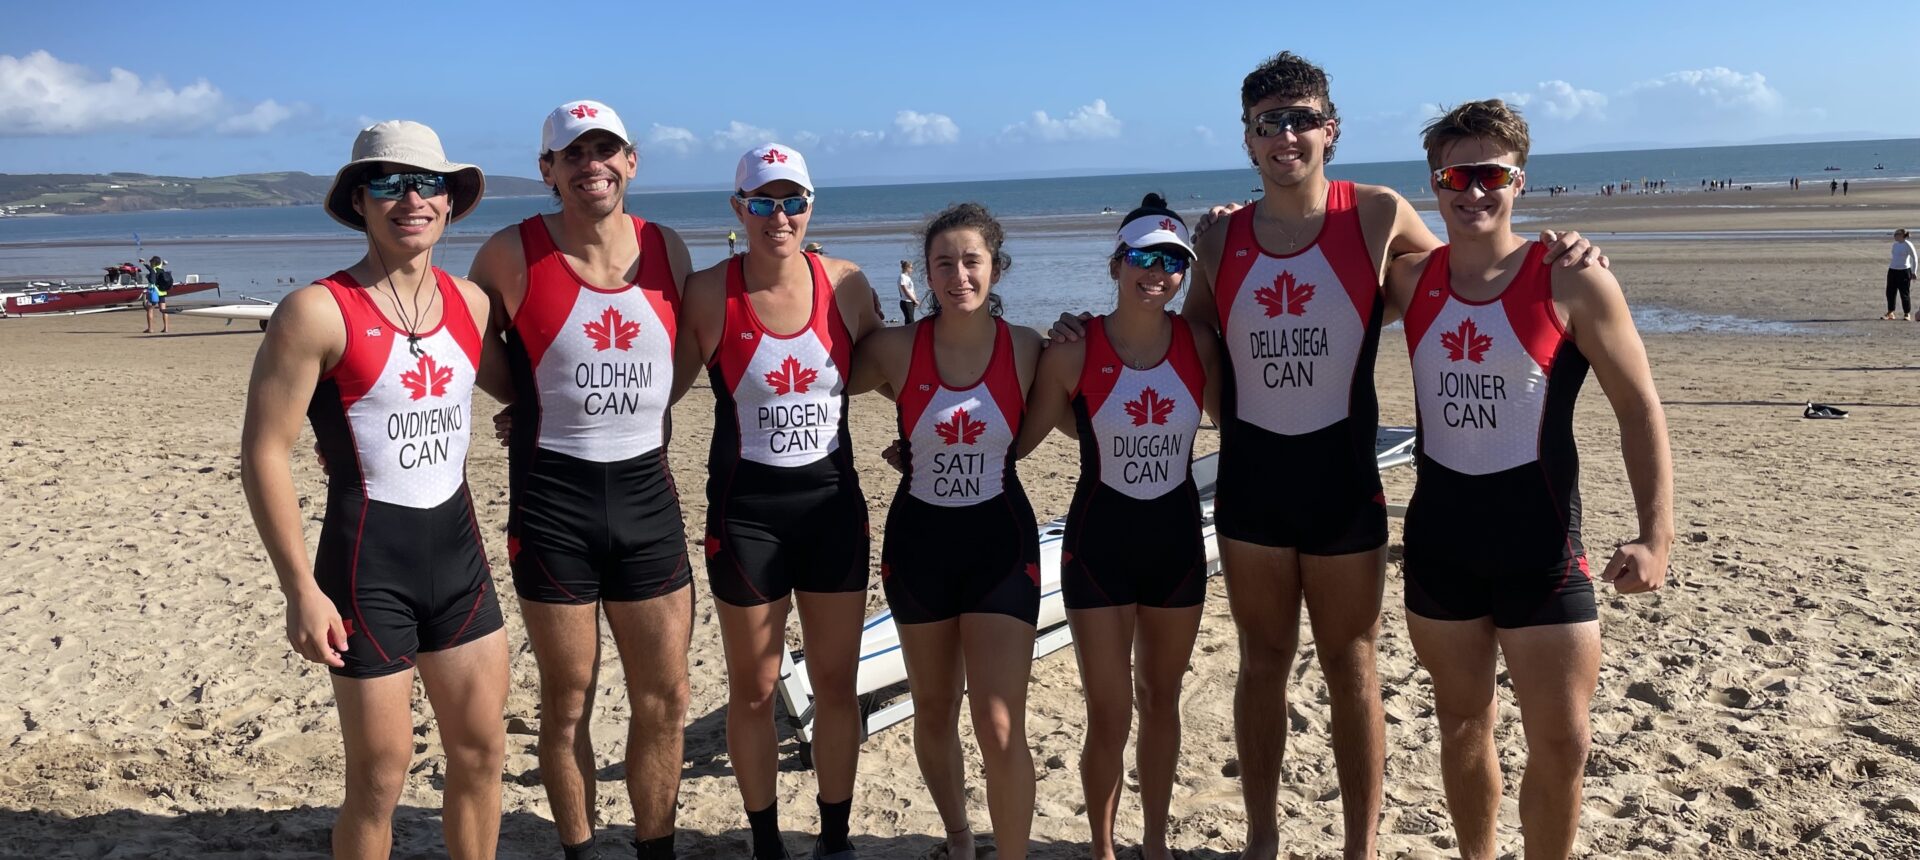 Making waves at the World Rowing Beach Sprint Finals